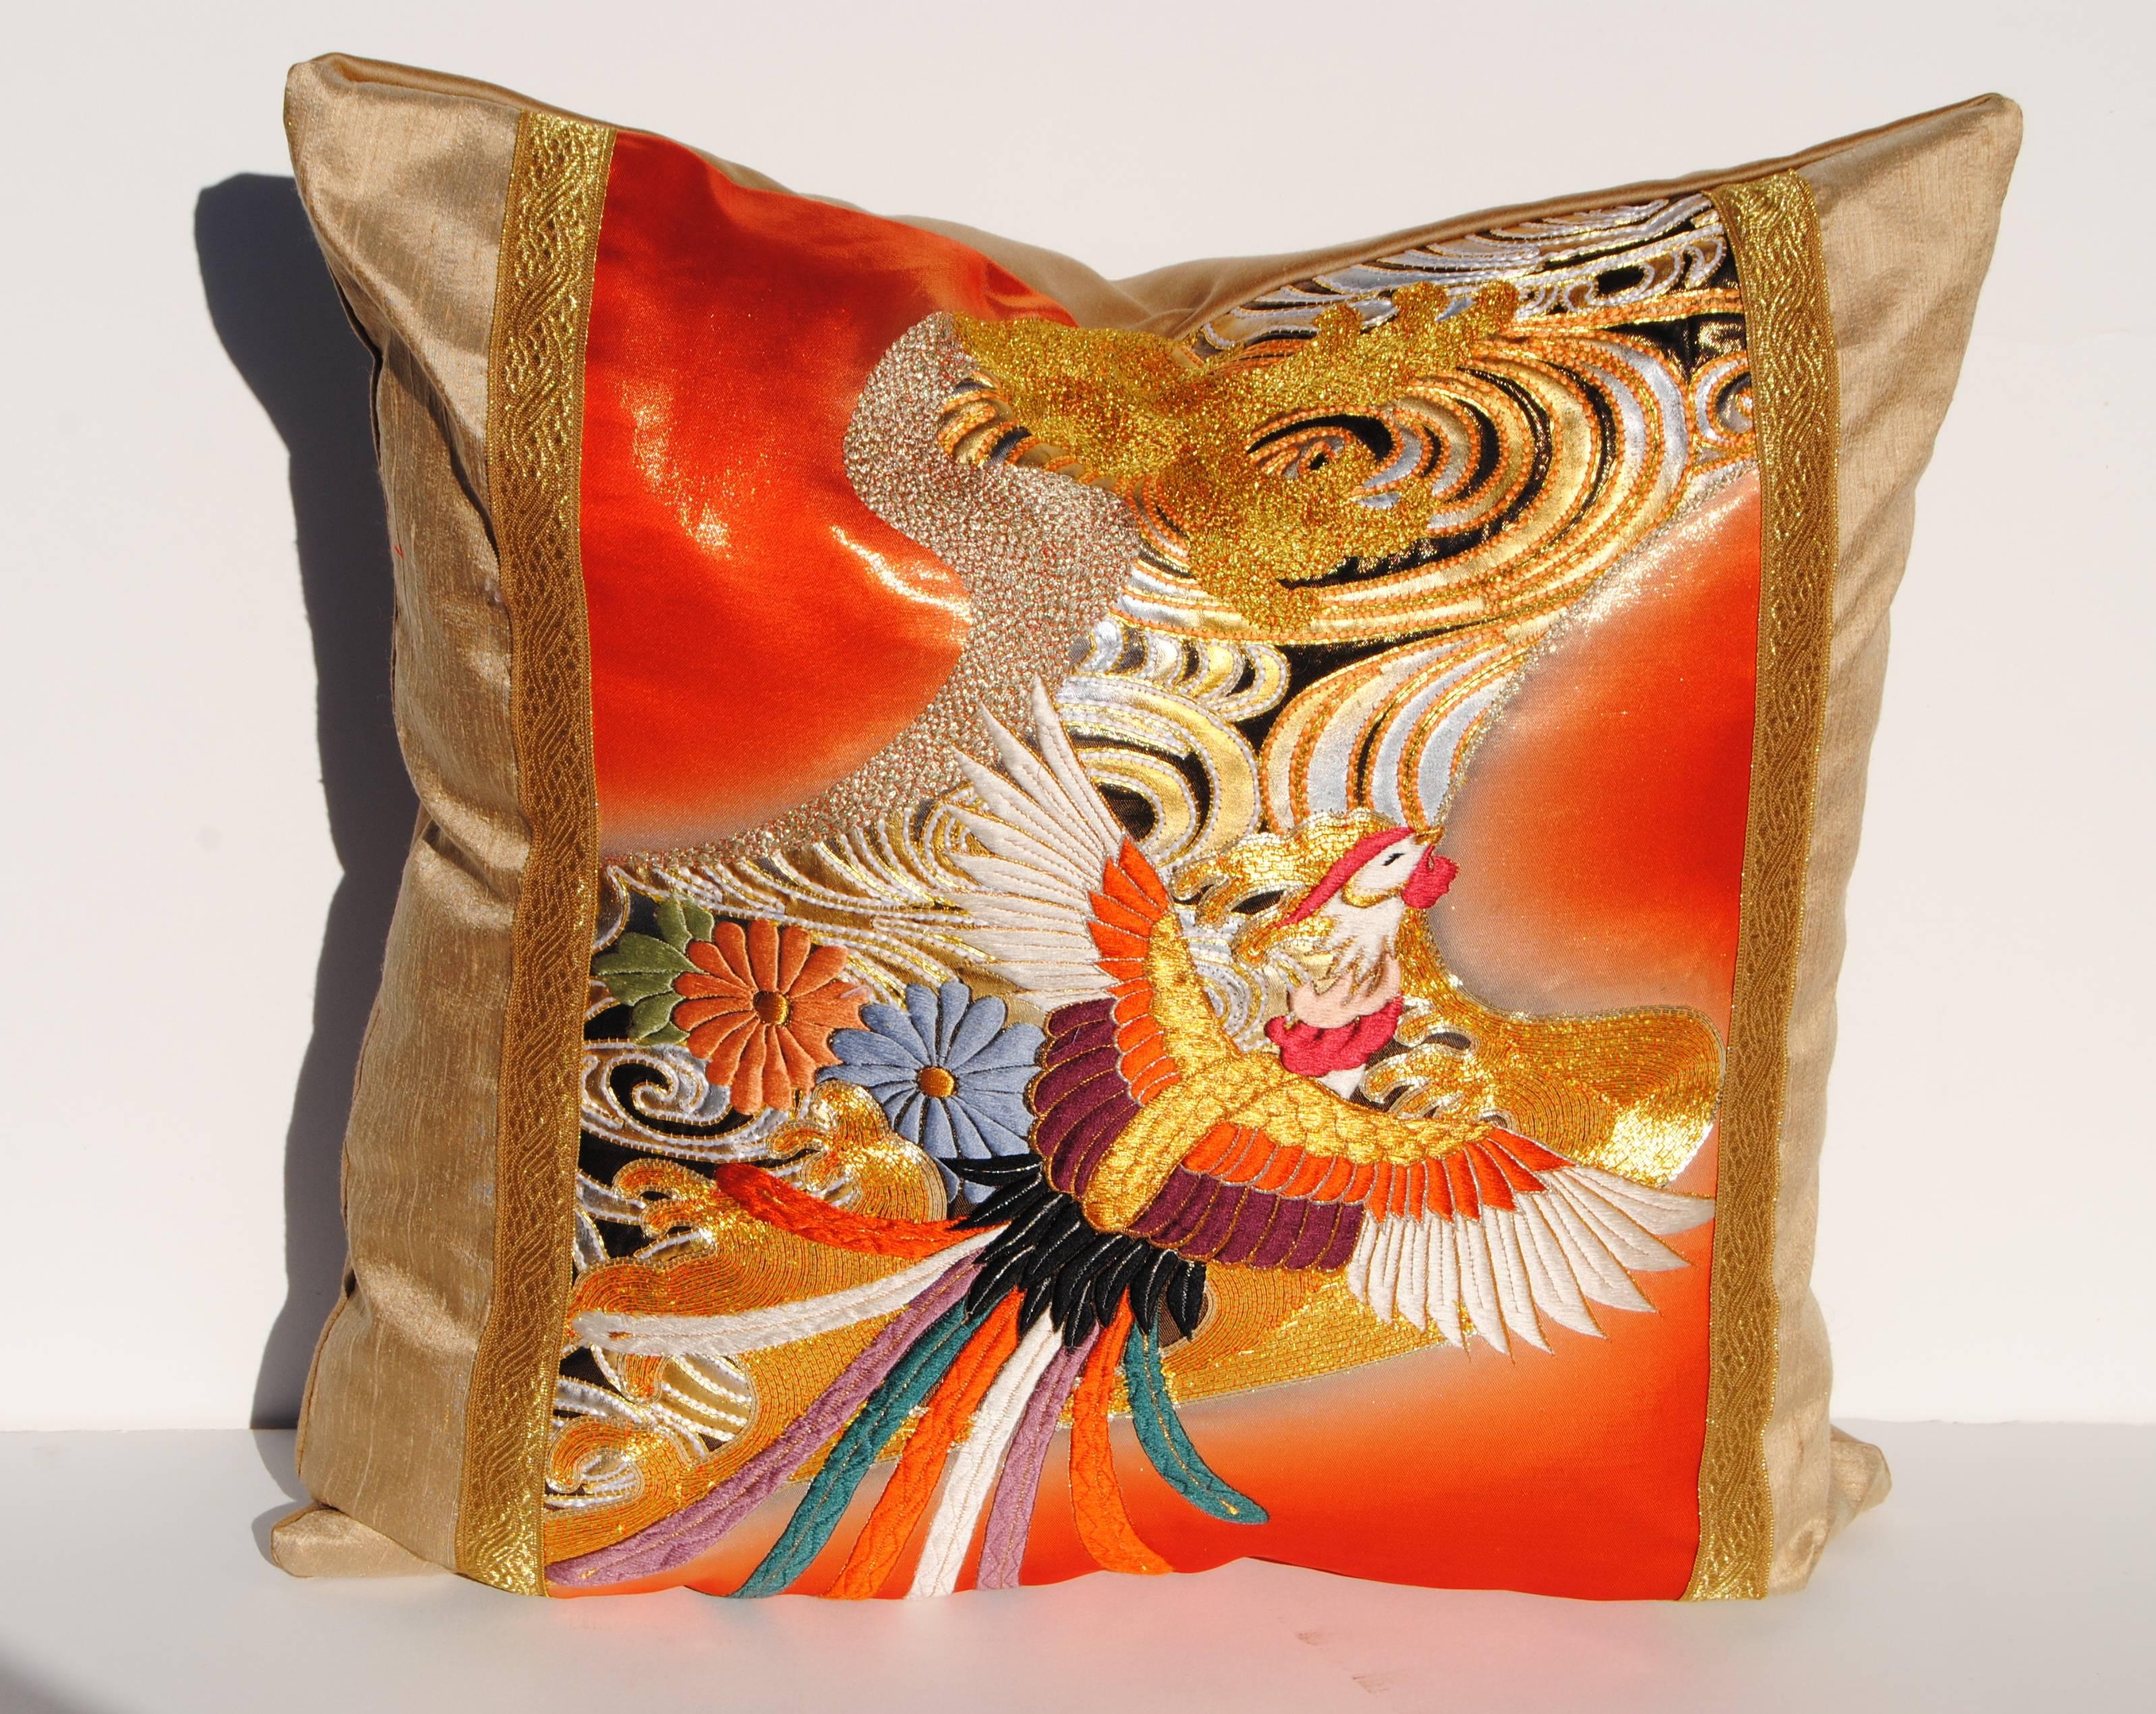 Custom pillow cut from a vintage embroidered silk Japanese uchikake wedding kimono. The red or orange silk is embroidered with silk and metallic threads. The pillow is faced with a cream silk and bands of gold metallic trim. It is backed with a wool